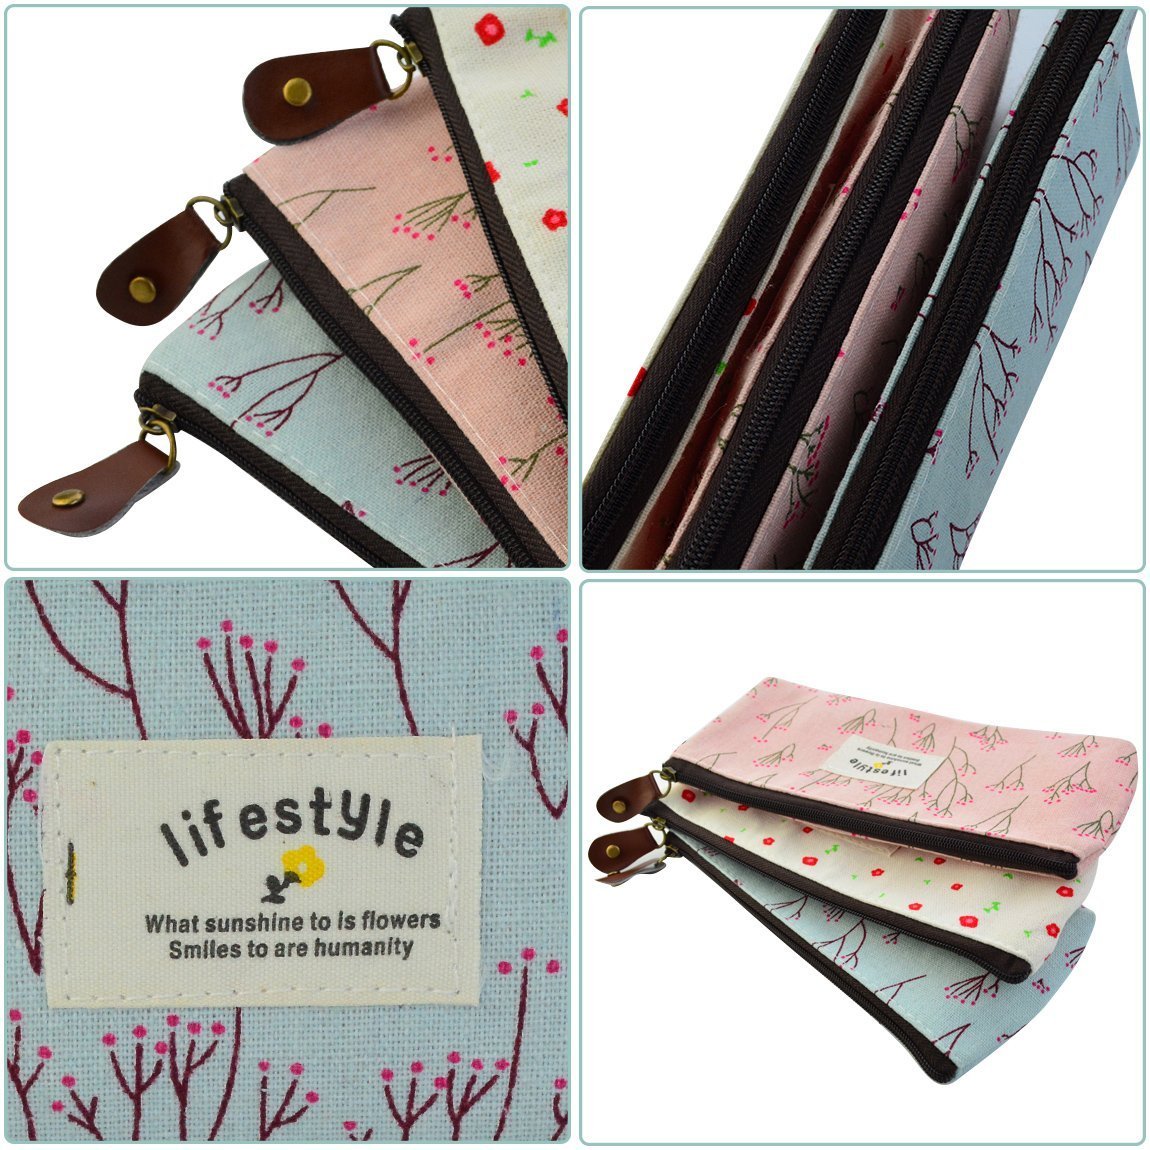 Miayon Countryside Flower Floral Pencil Pen Case Cosmetic Makeup Bag Set of 3 by Miayon